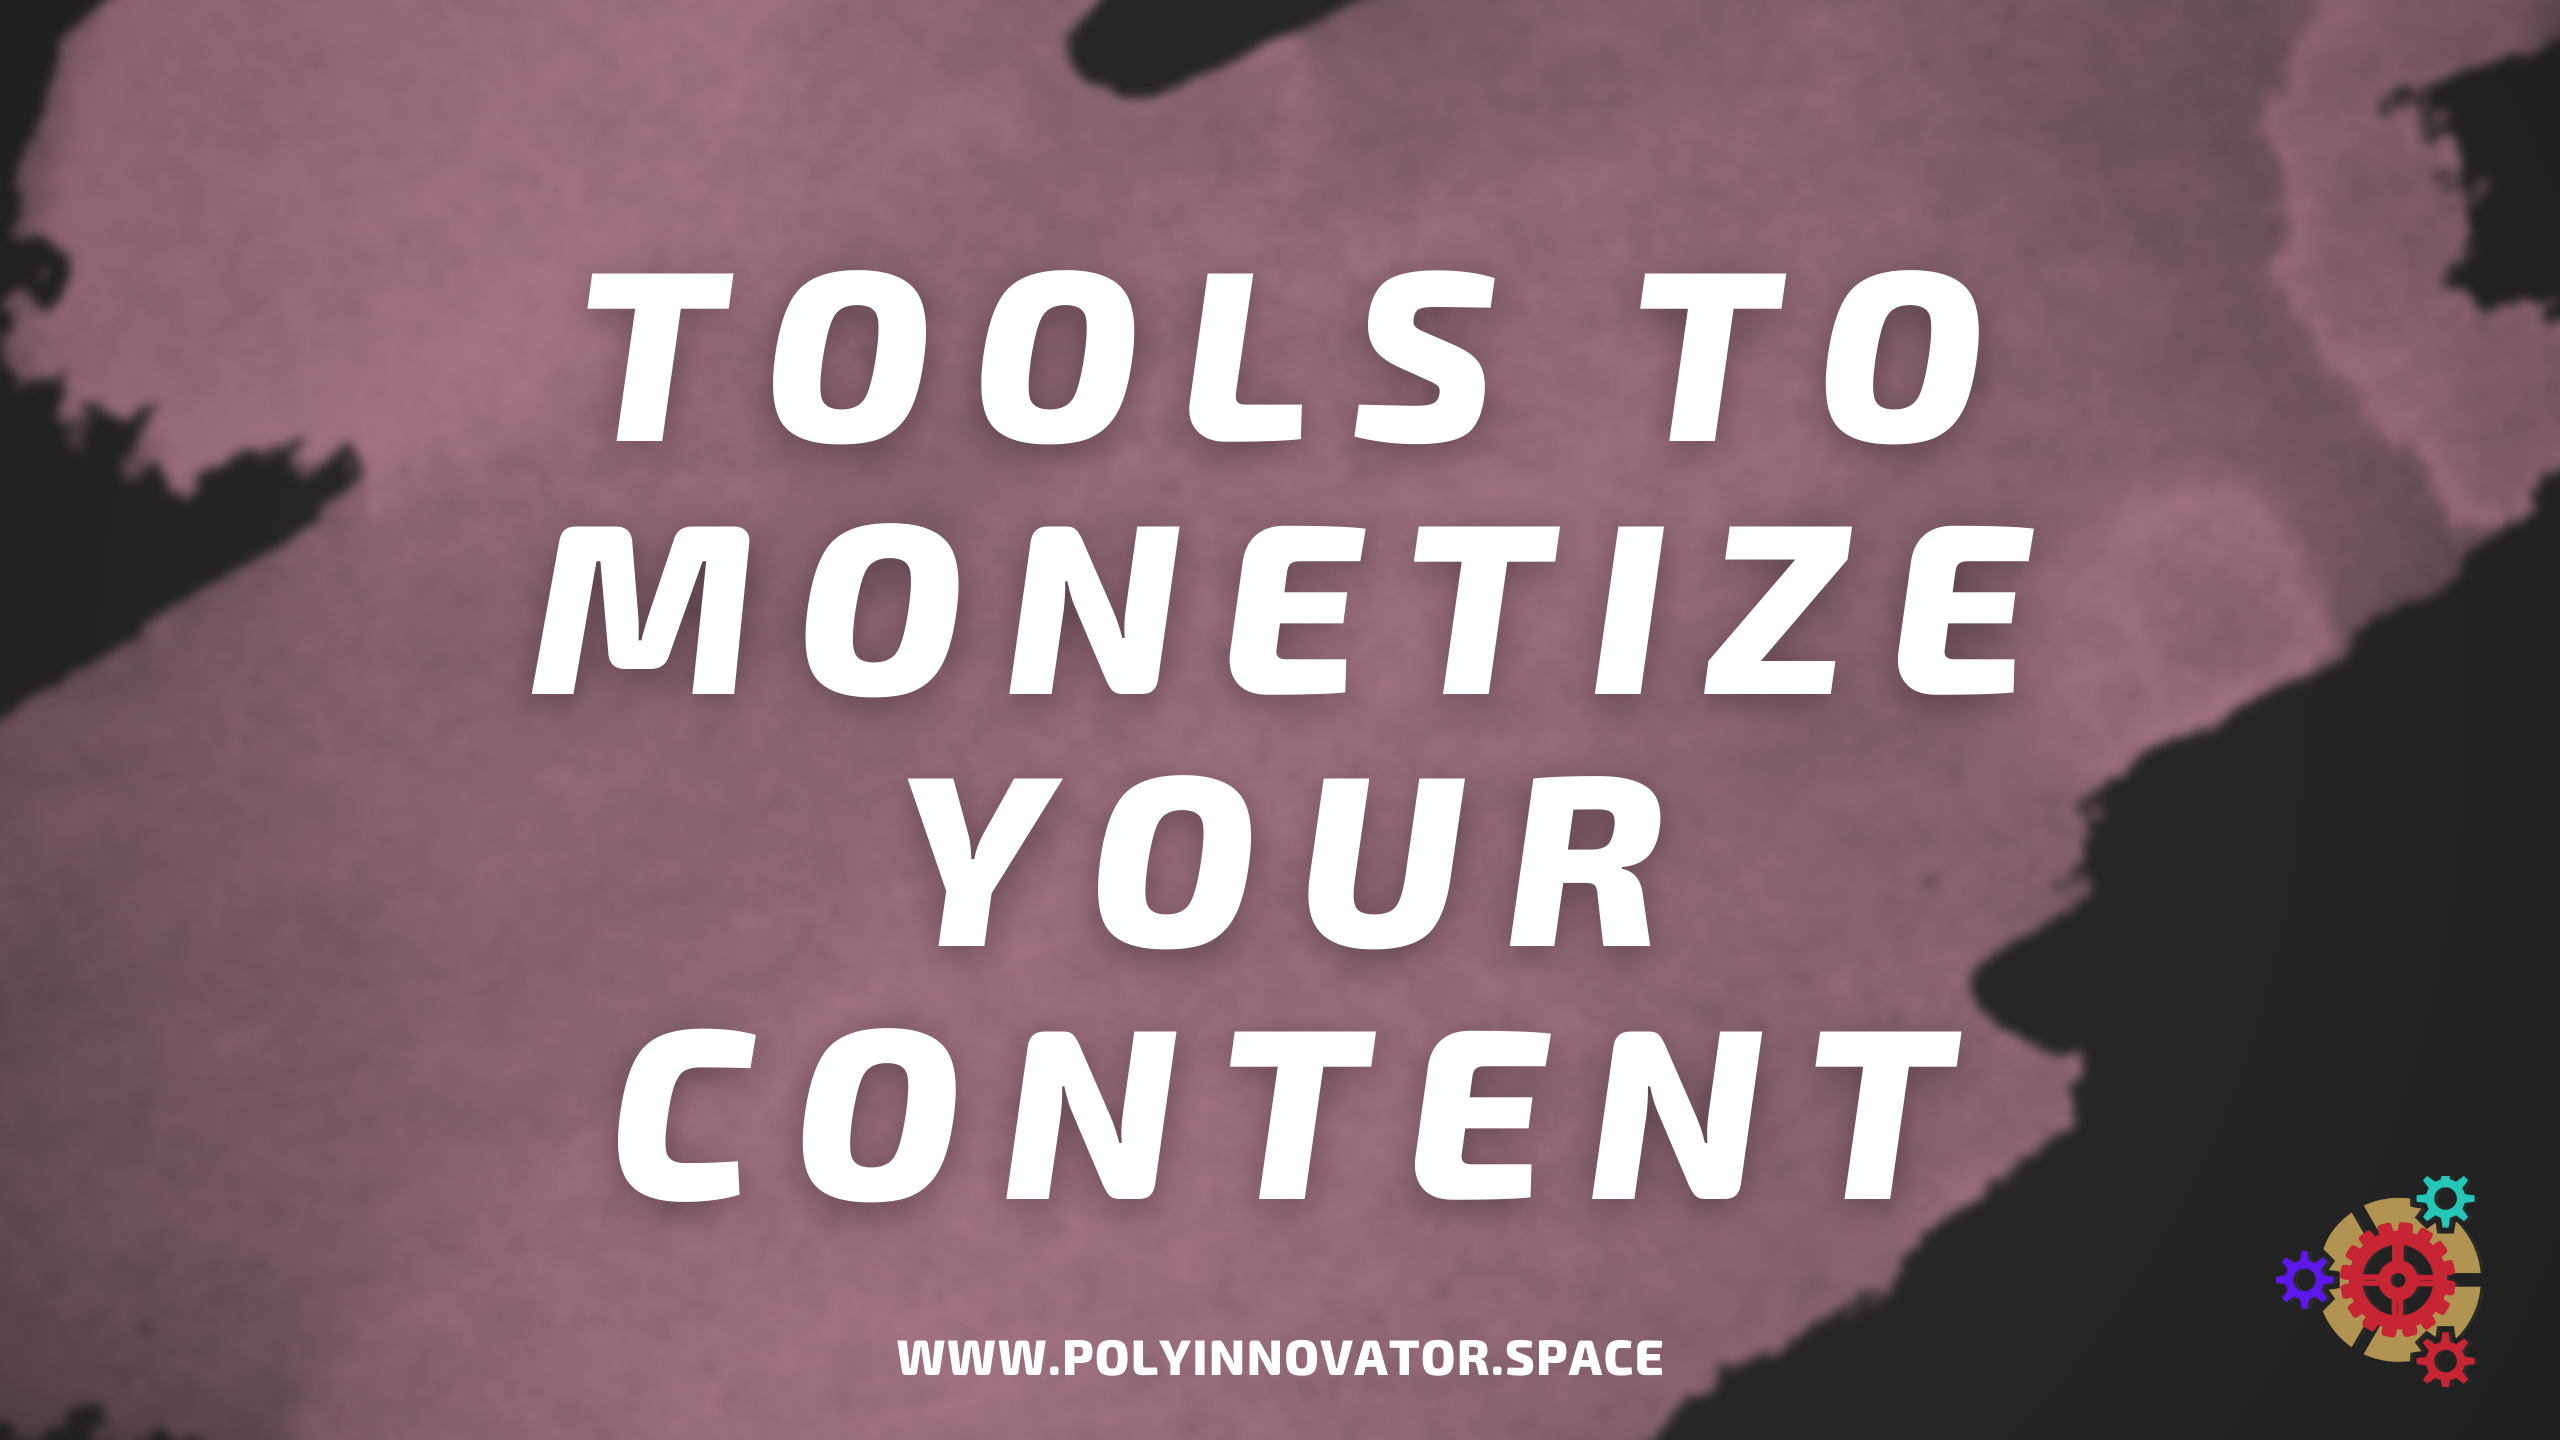 Tools to Monetize Your Content